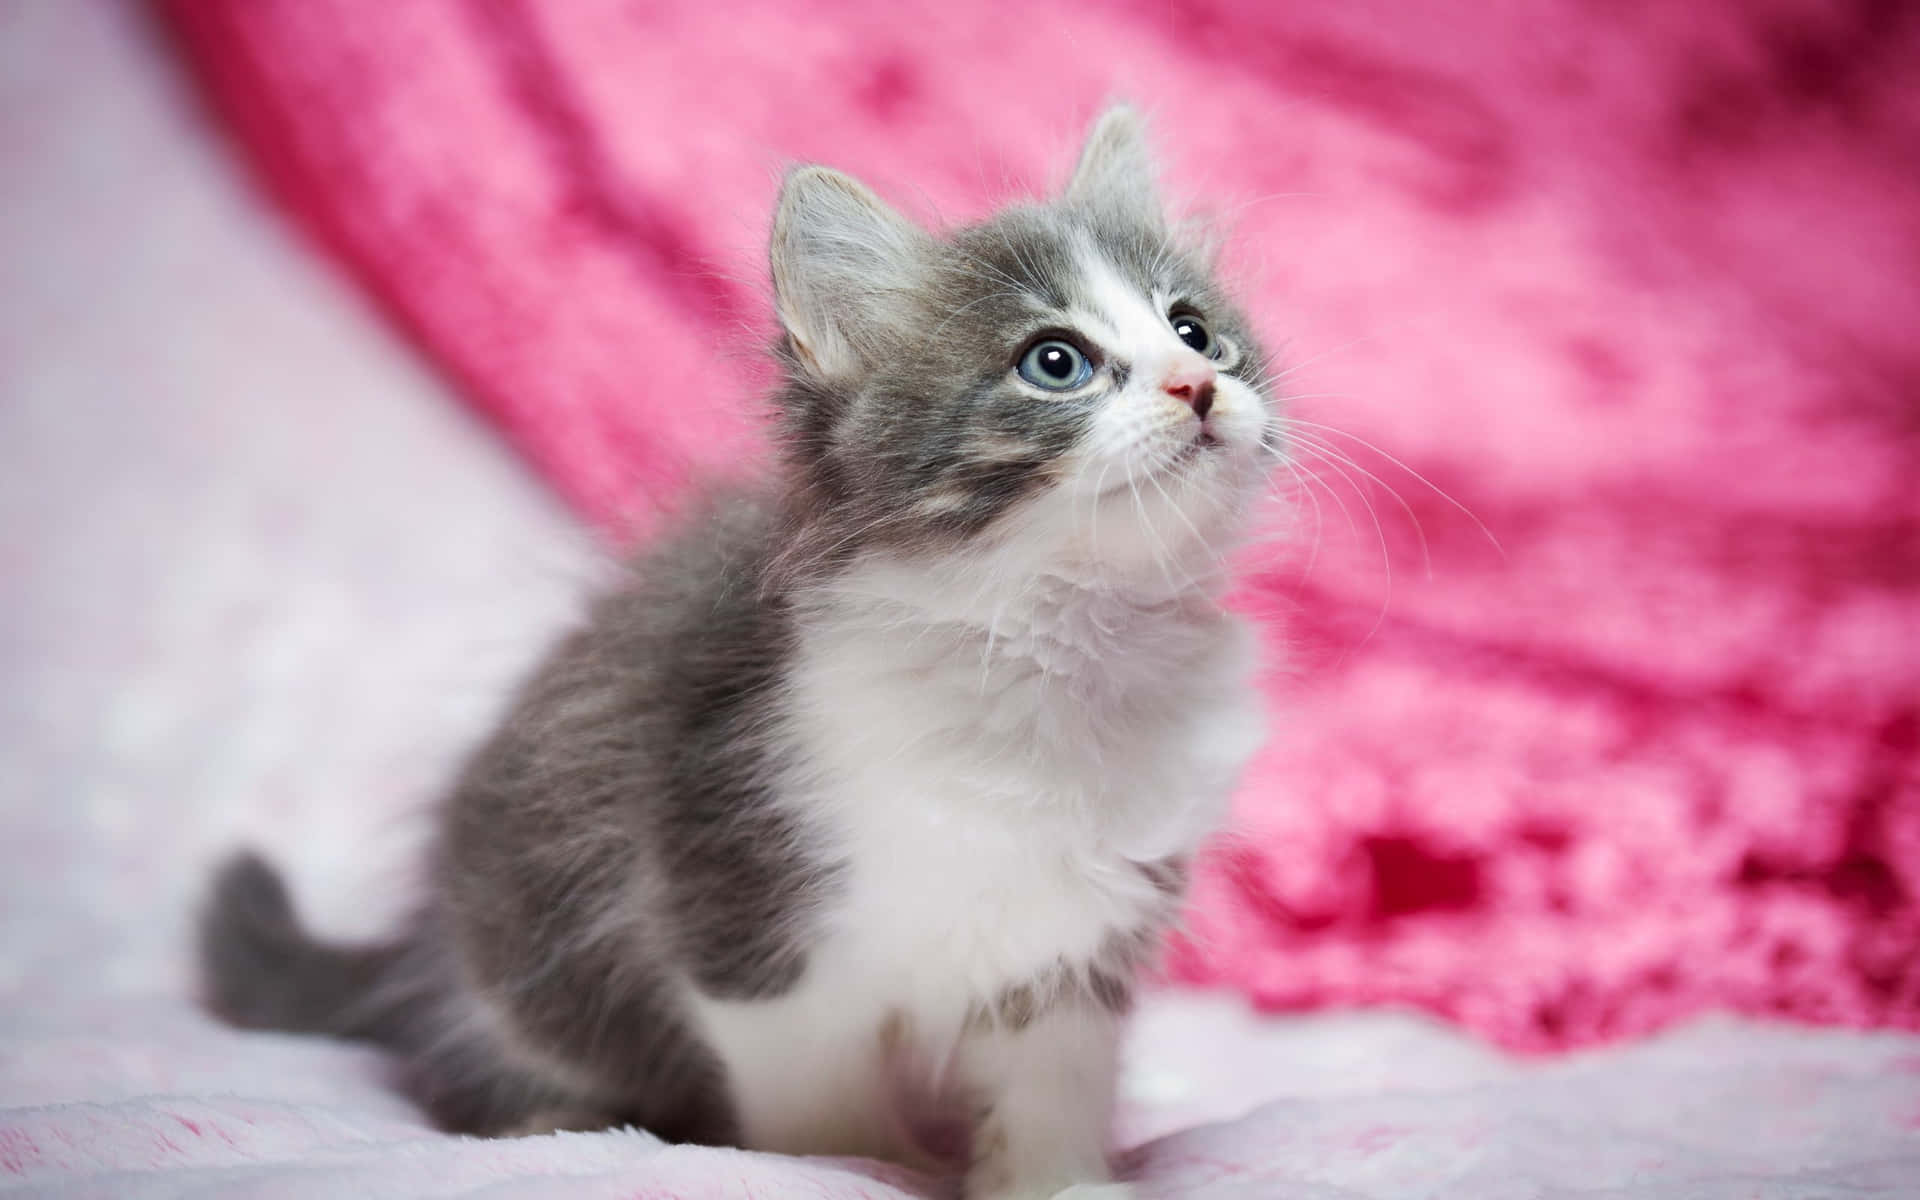 A Small Grey And White Kitten Sitting On A Pink Blanket